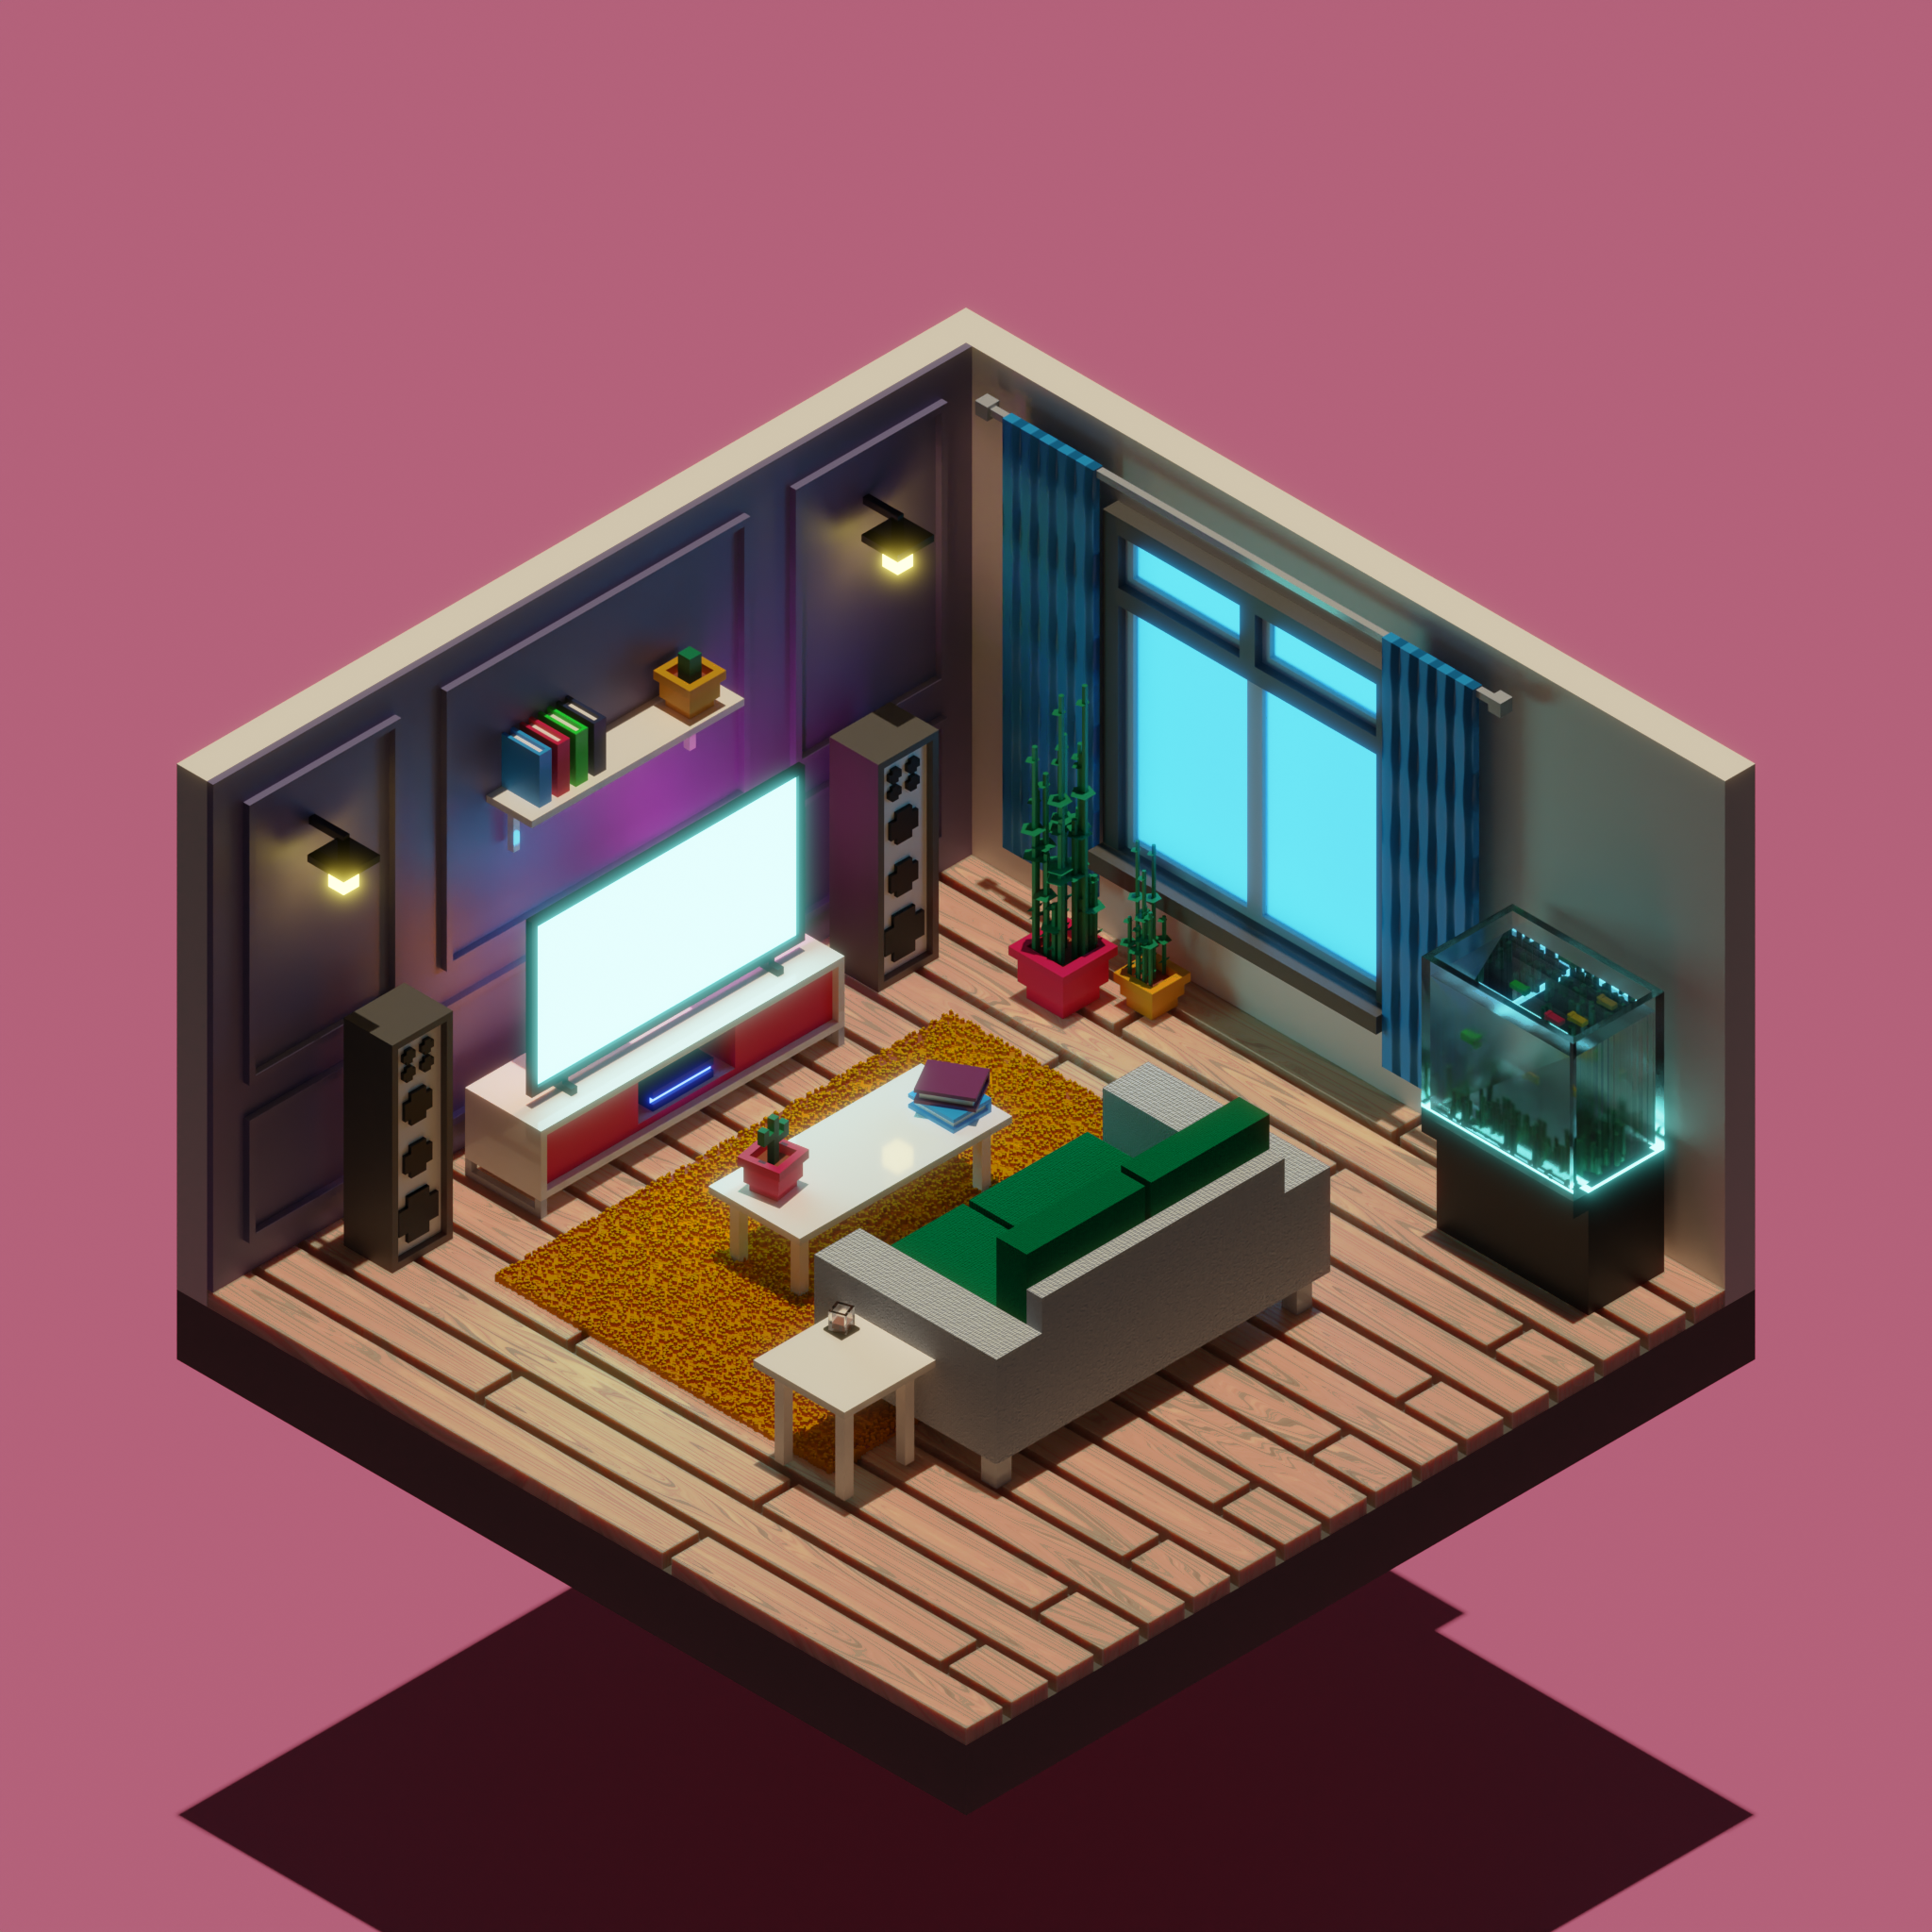 A voxel lounge